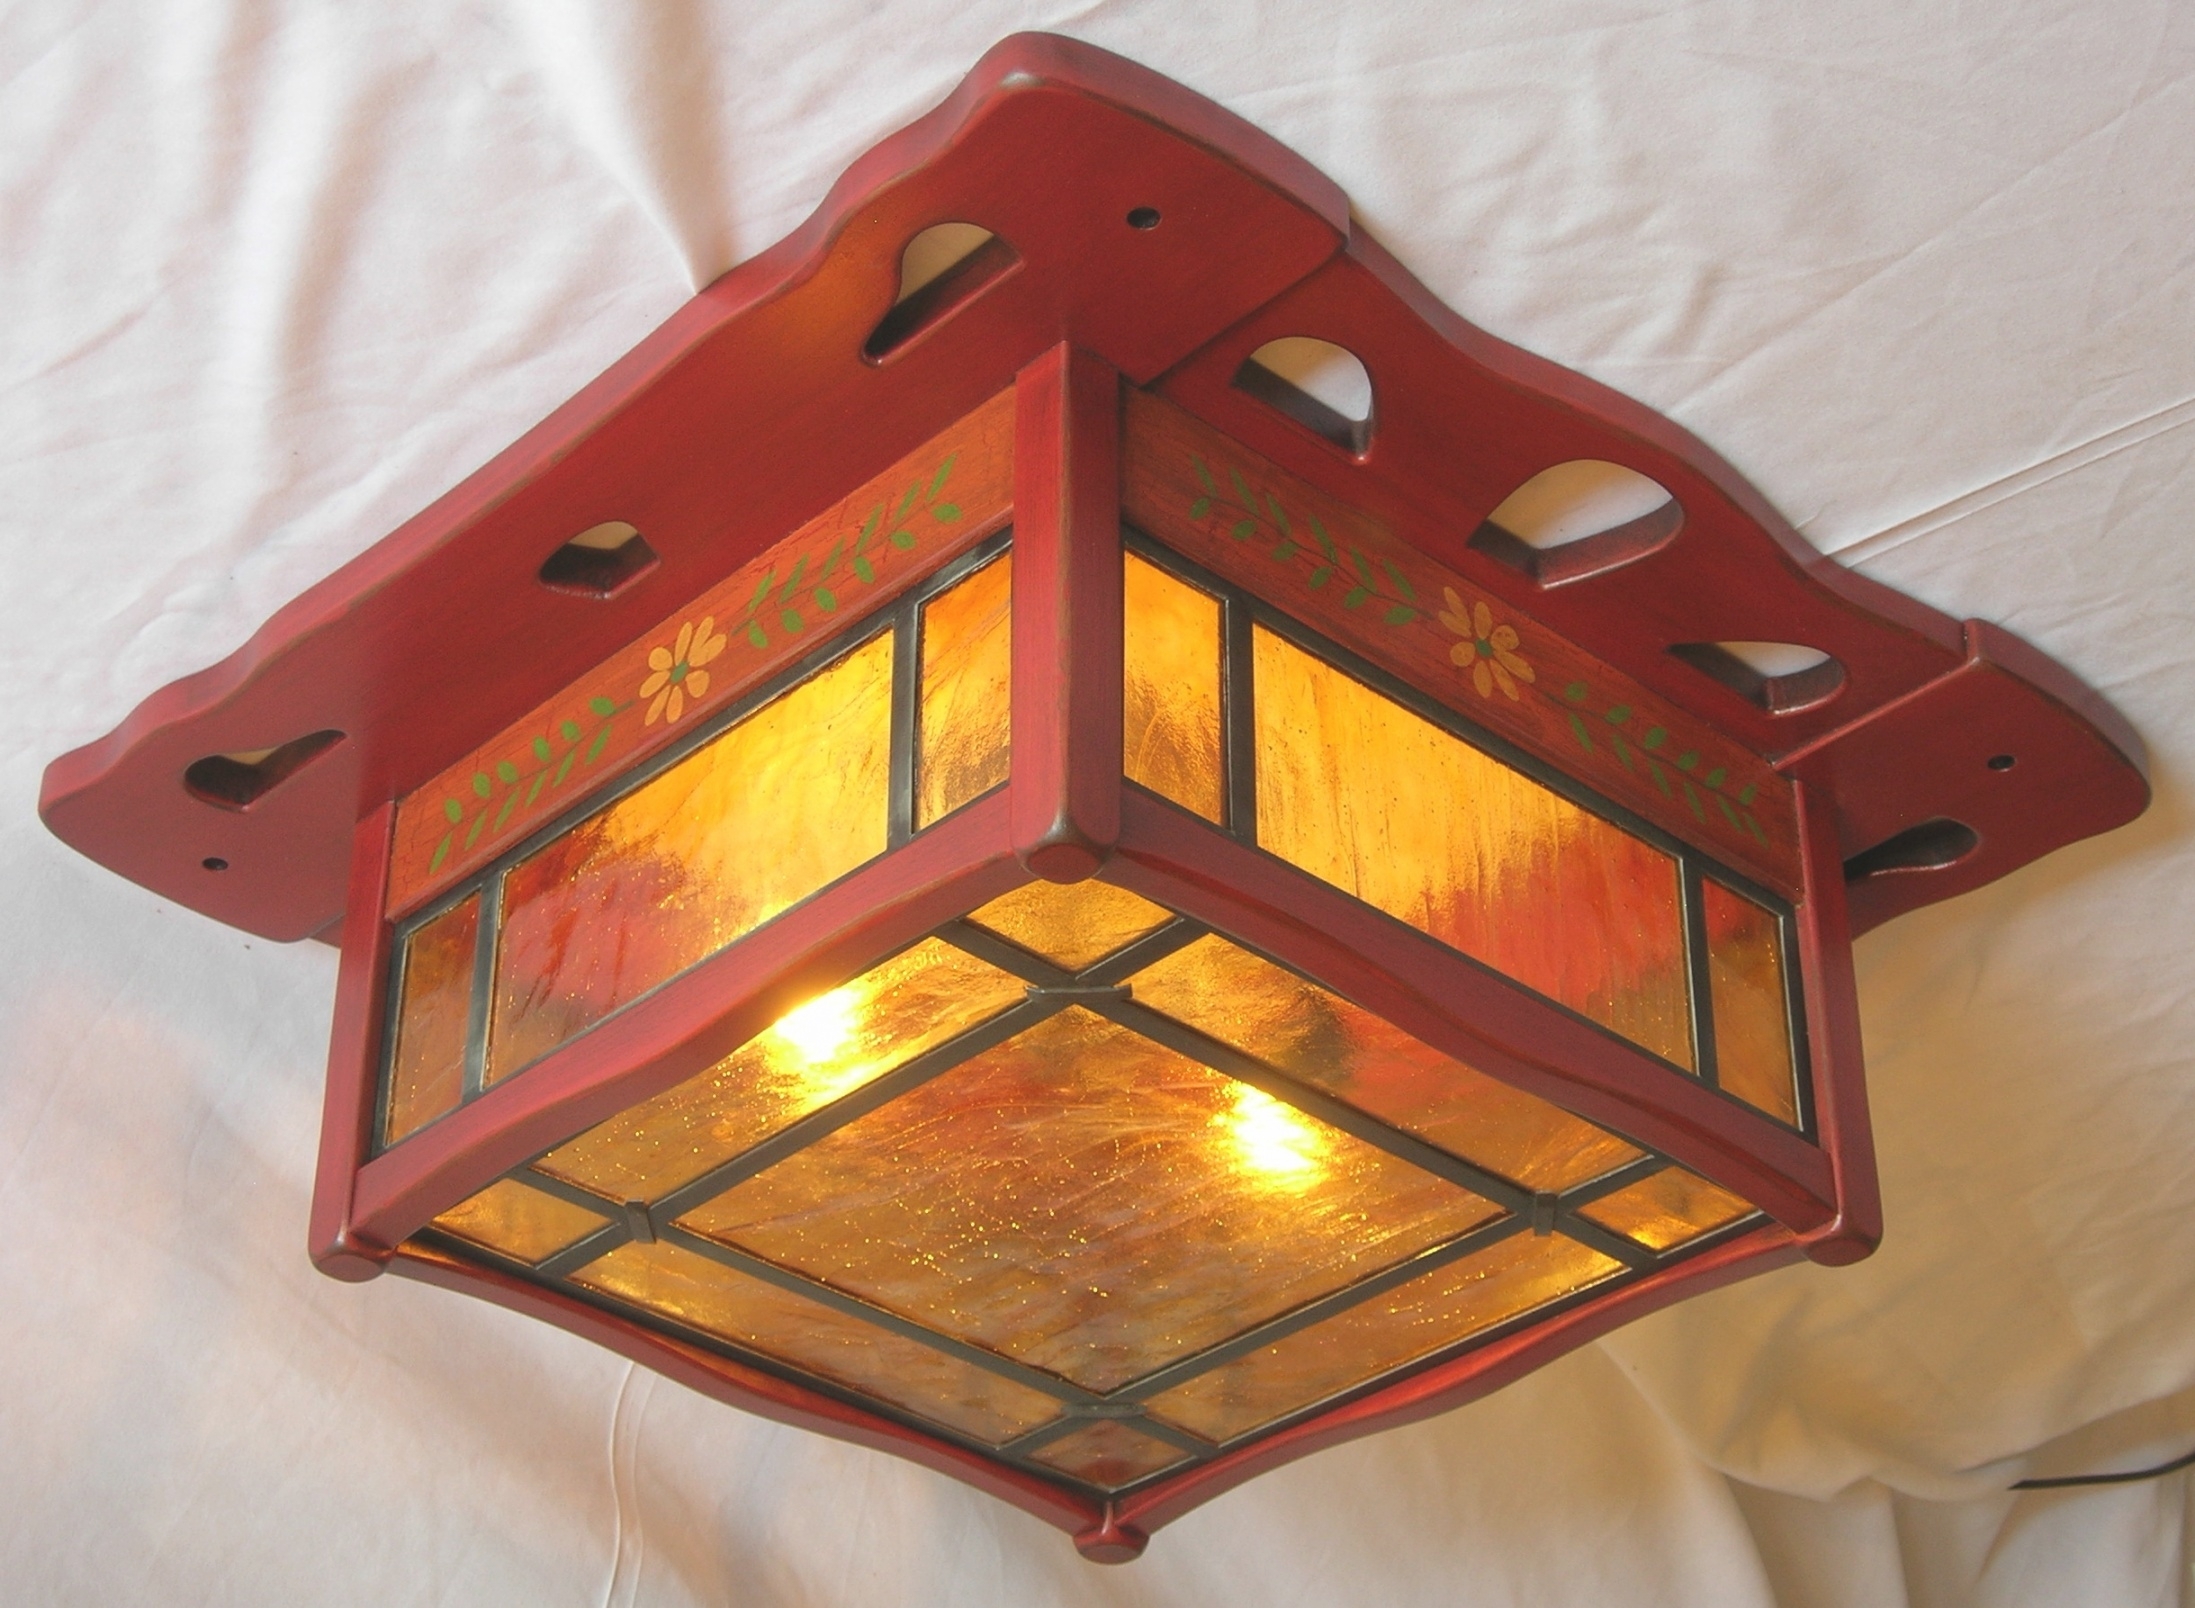 Arts And Crafts Ceiling Light Fixturearts crafts lighting fixtures for arts and crafts ceiling lights